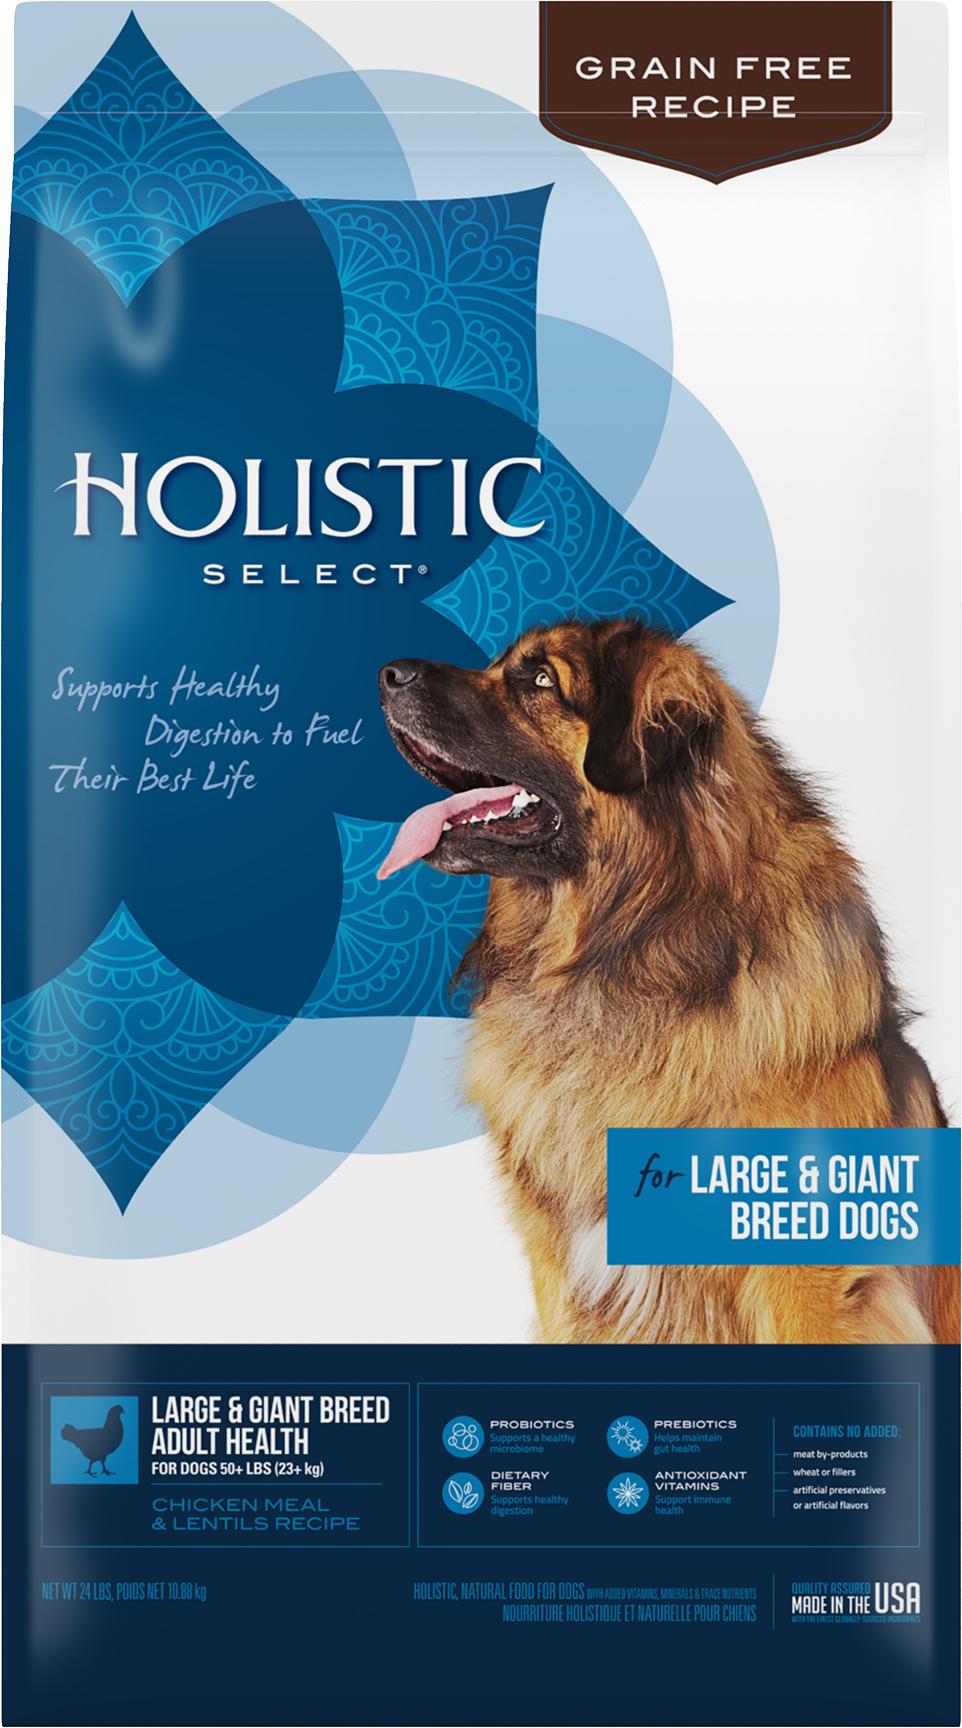 Grain Free Large & Giant Breed Adult product packaging image 1